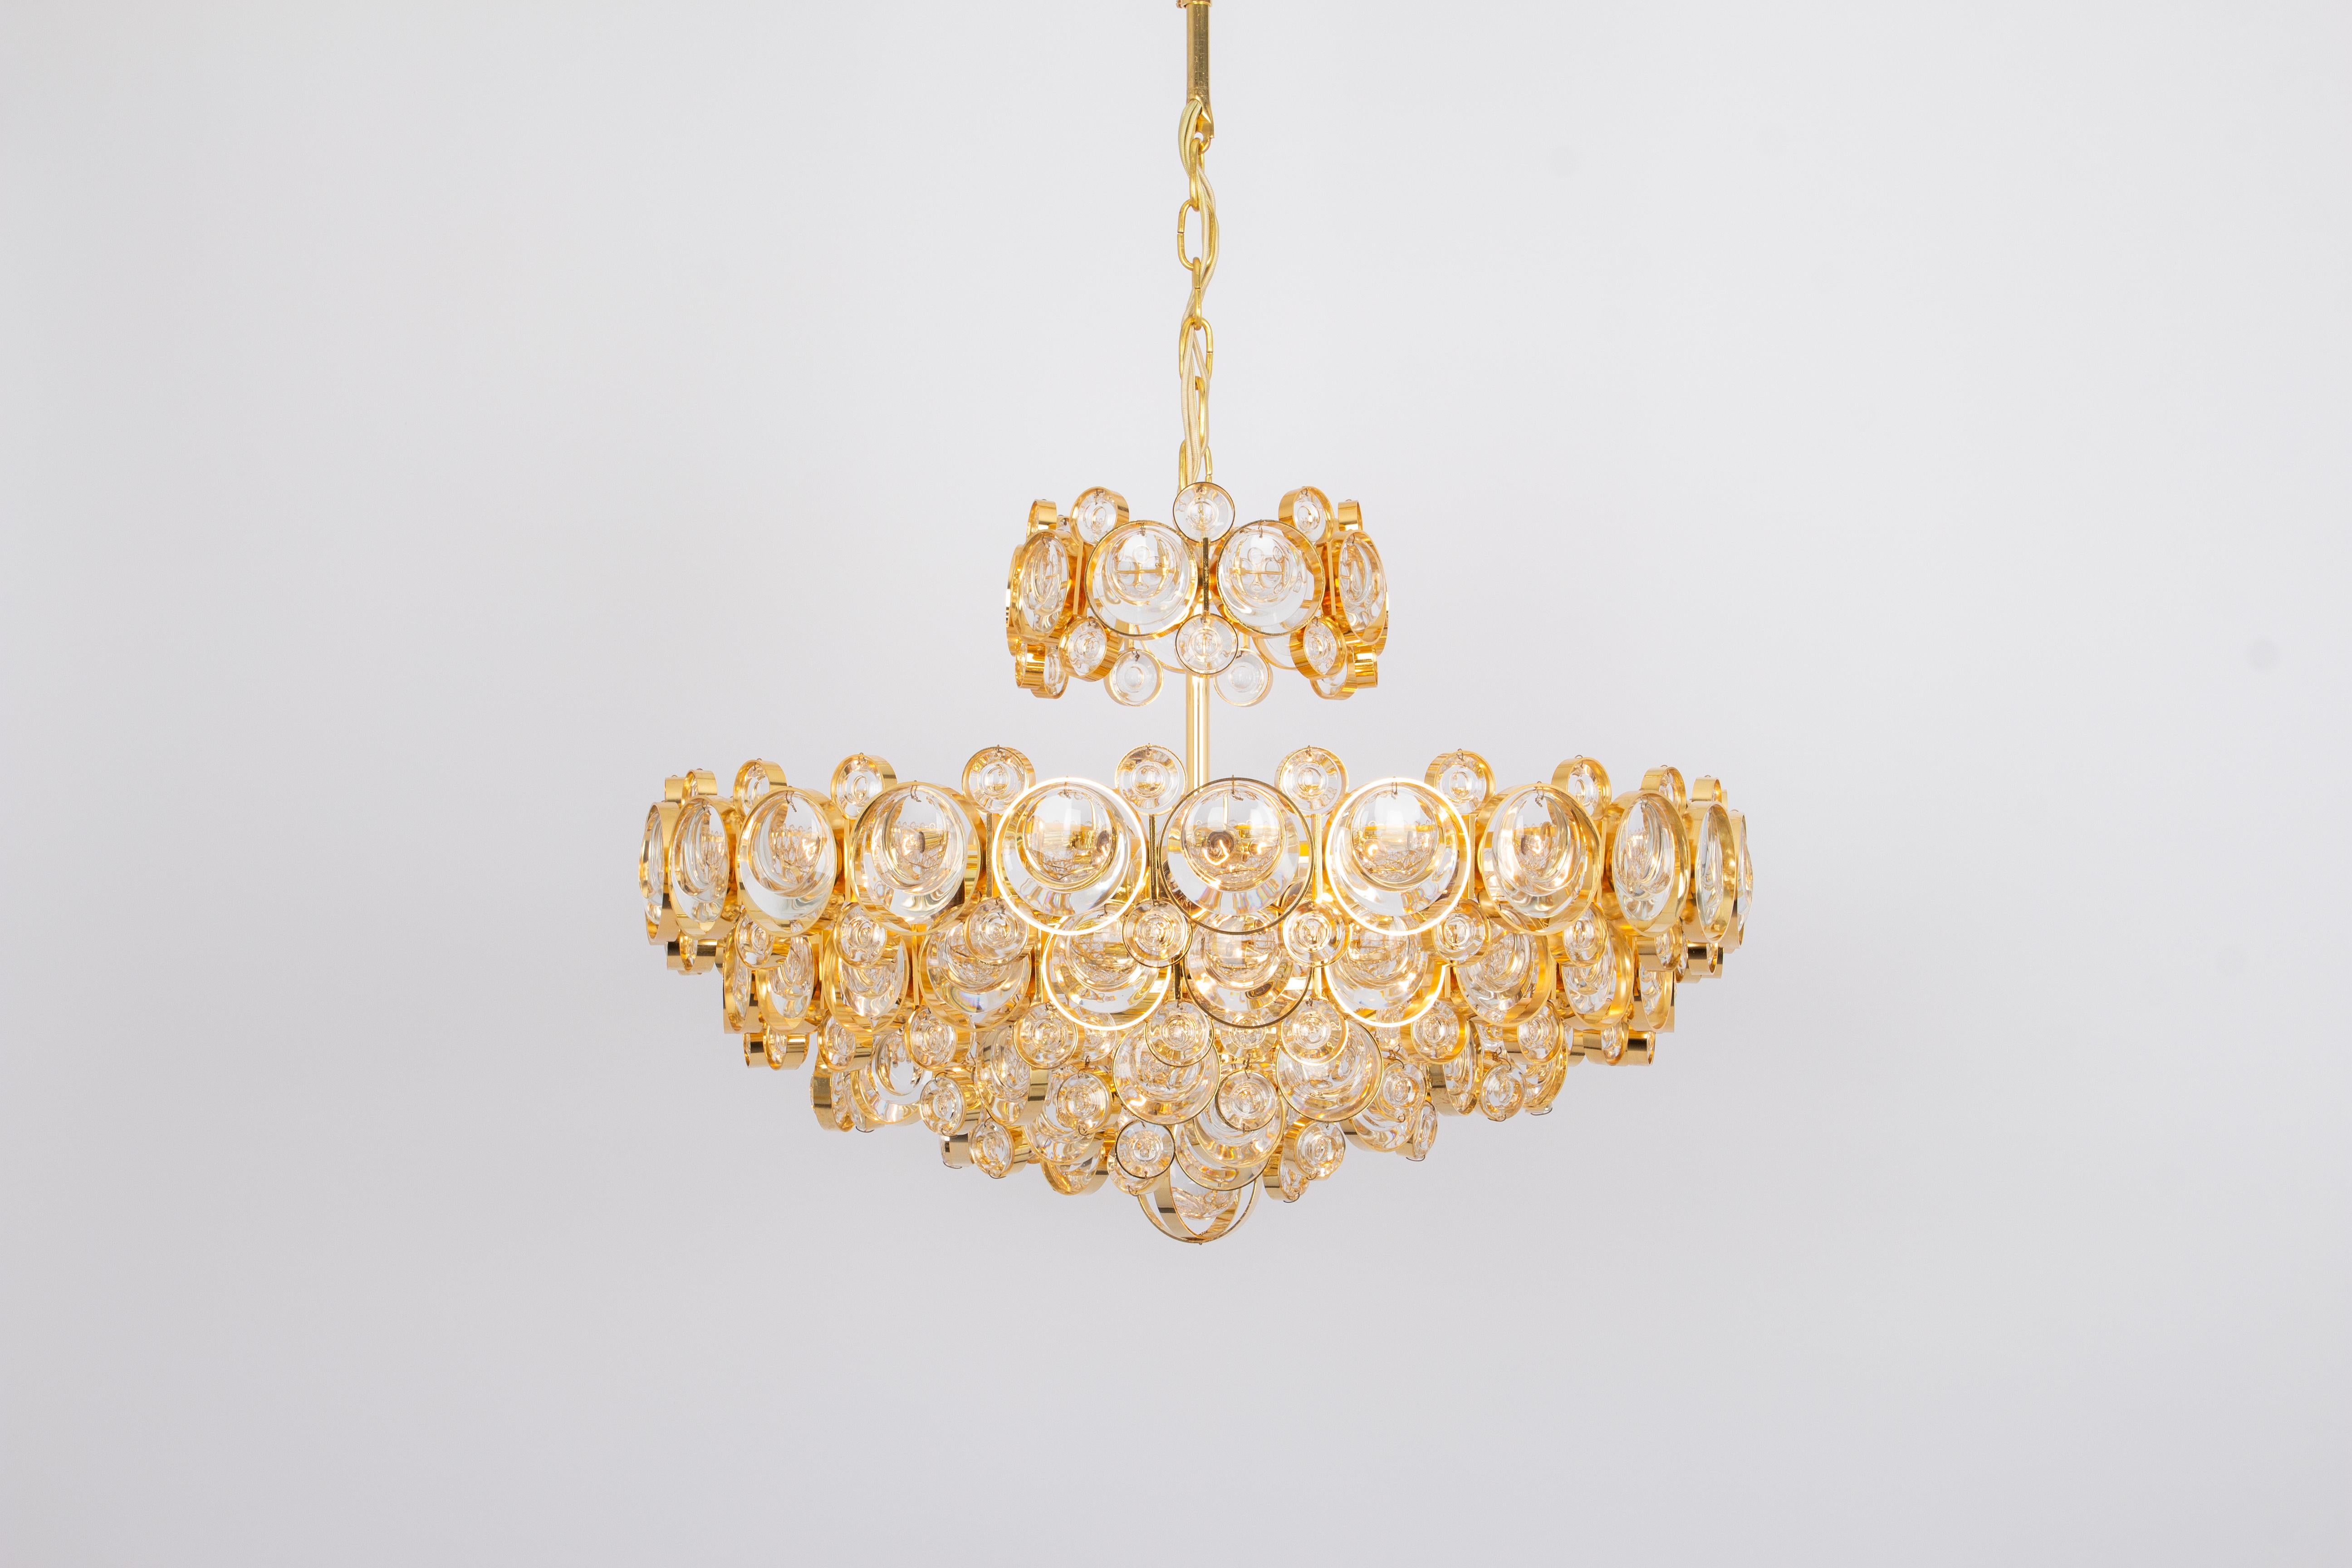 Gold Plate 1 of 2 Stunning Large Gilt Brass Chandelier, Sciolari, Palwa, Germany, 1970s For Sale